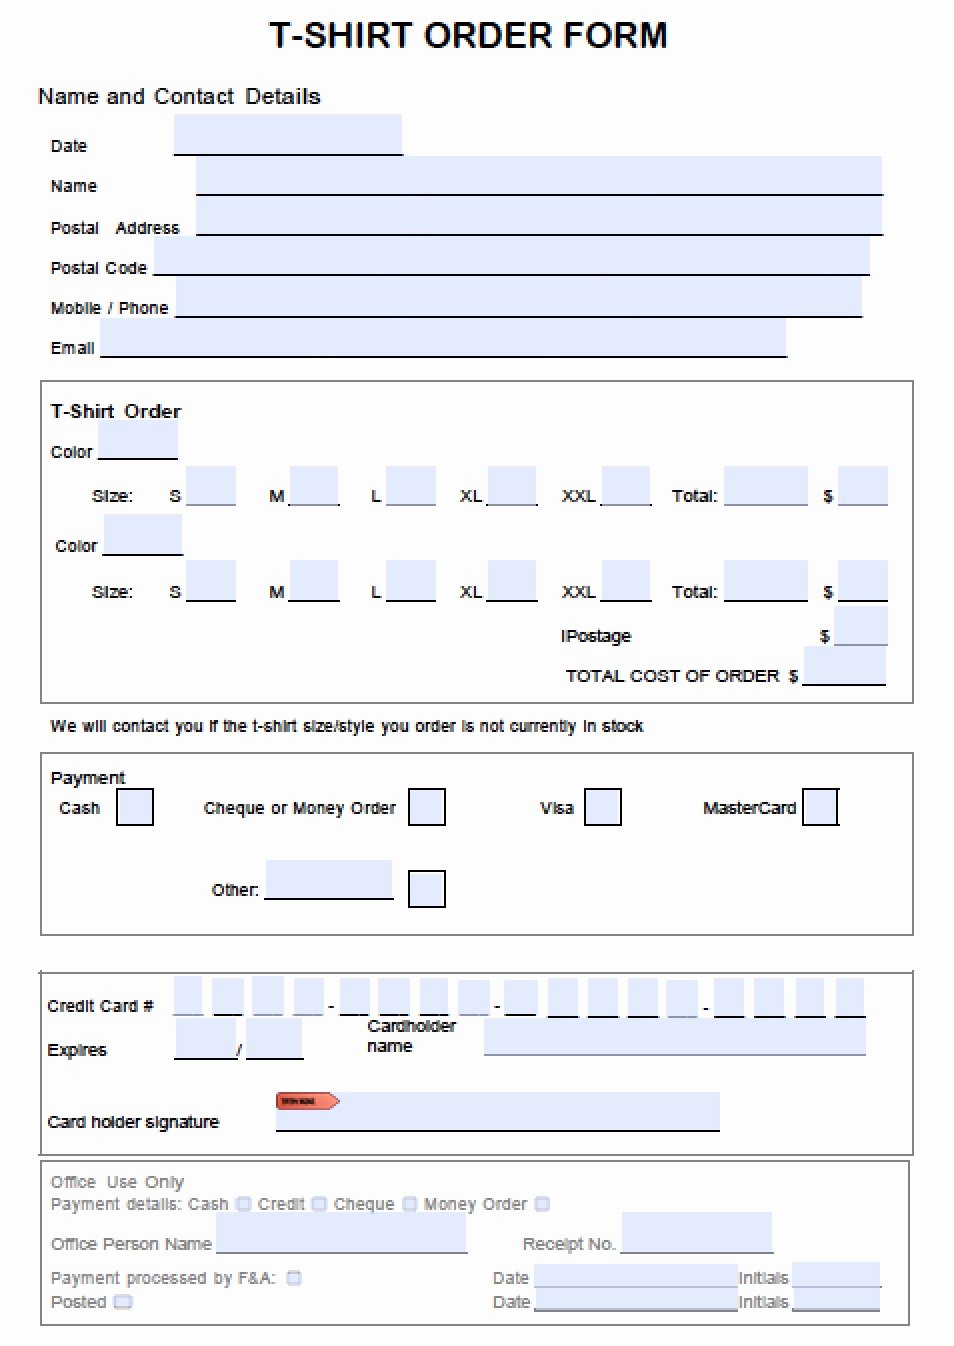 Order form Template Excel New T Shirt order form Template